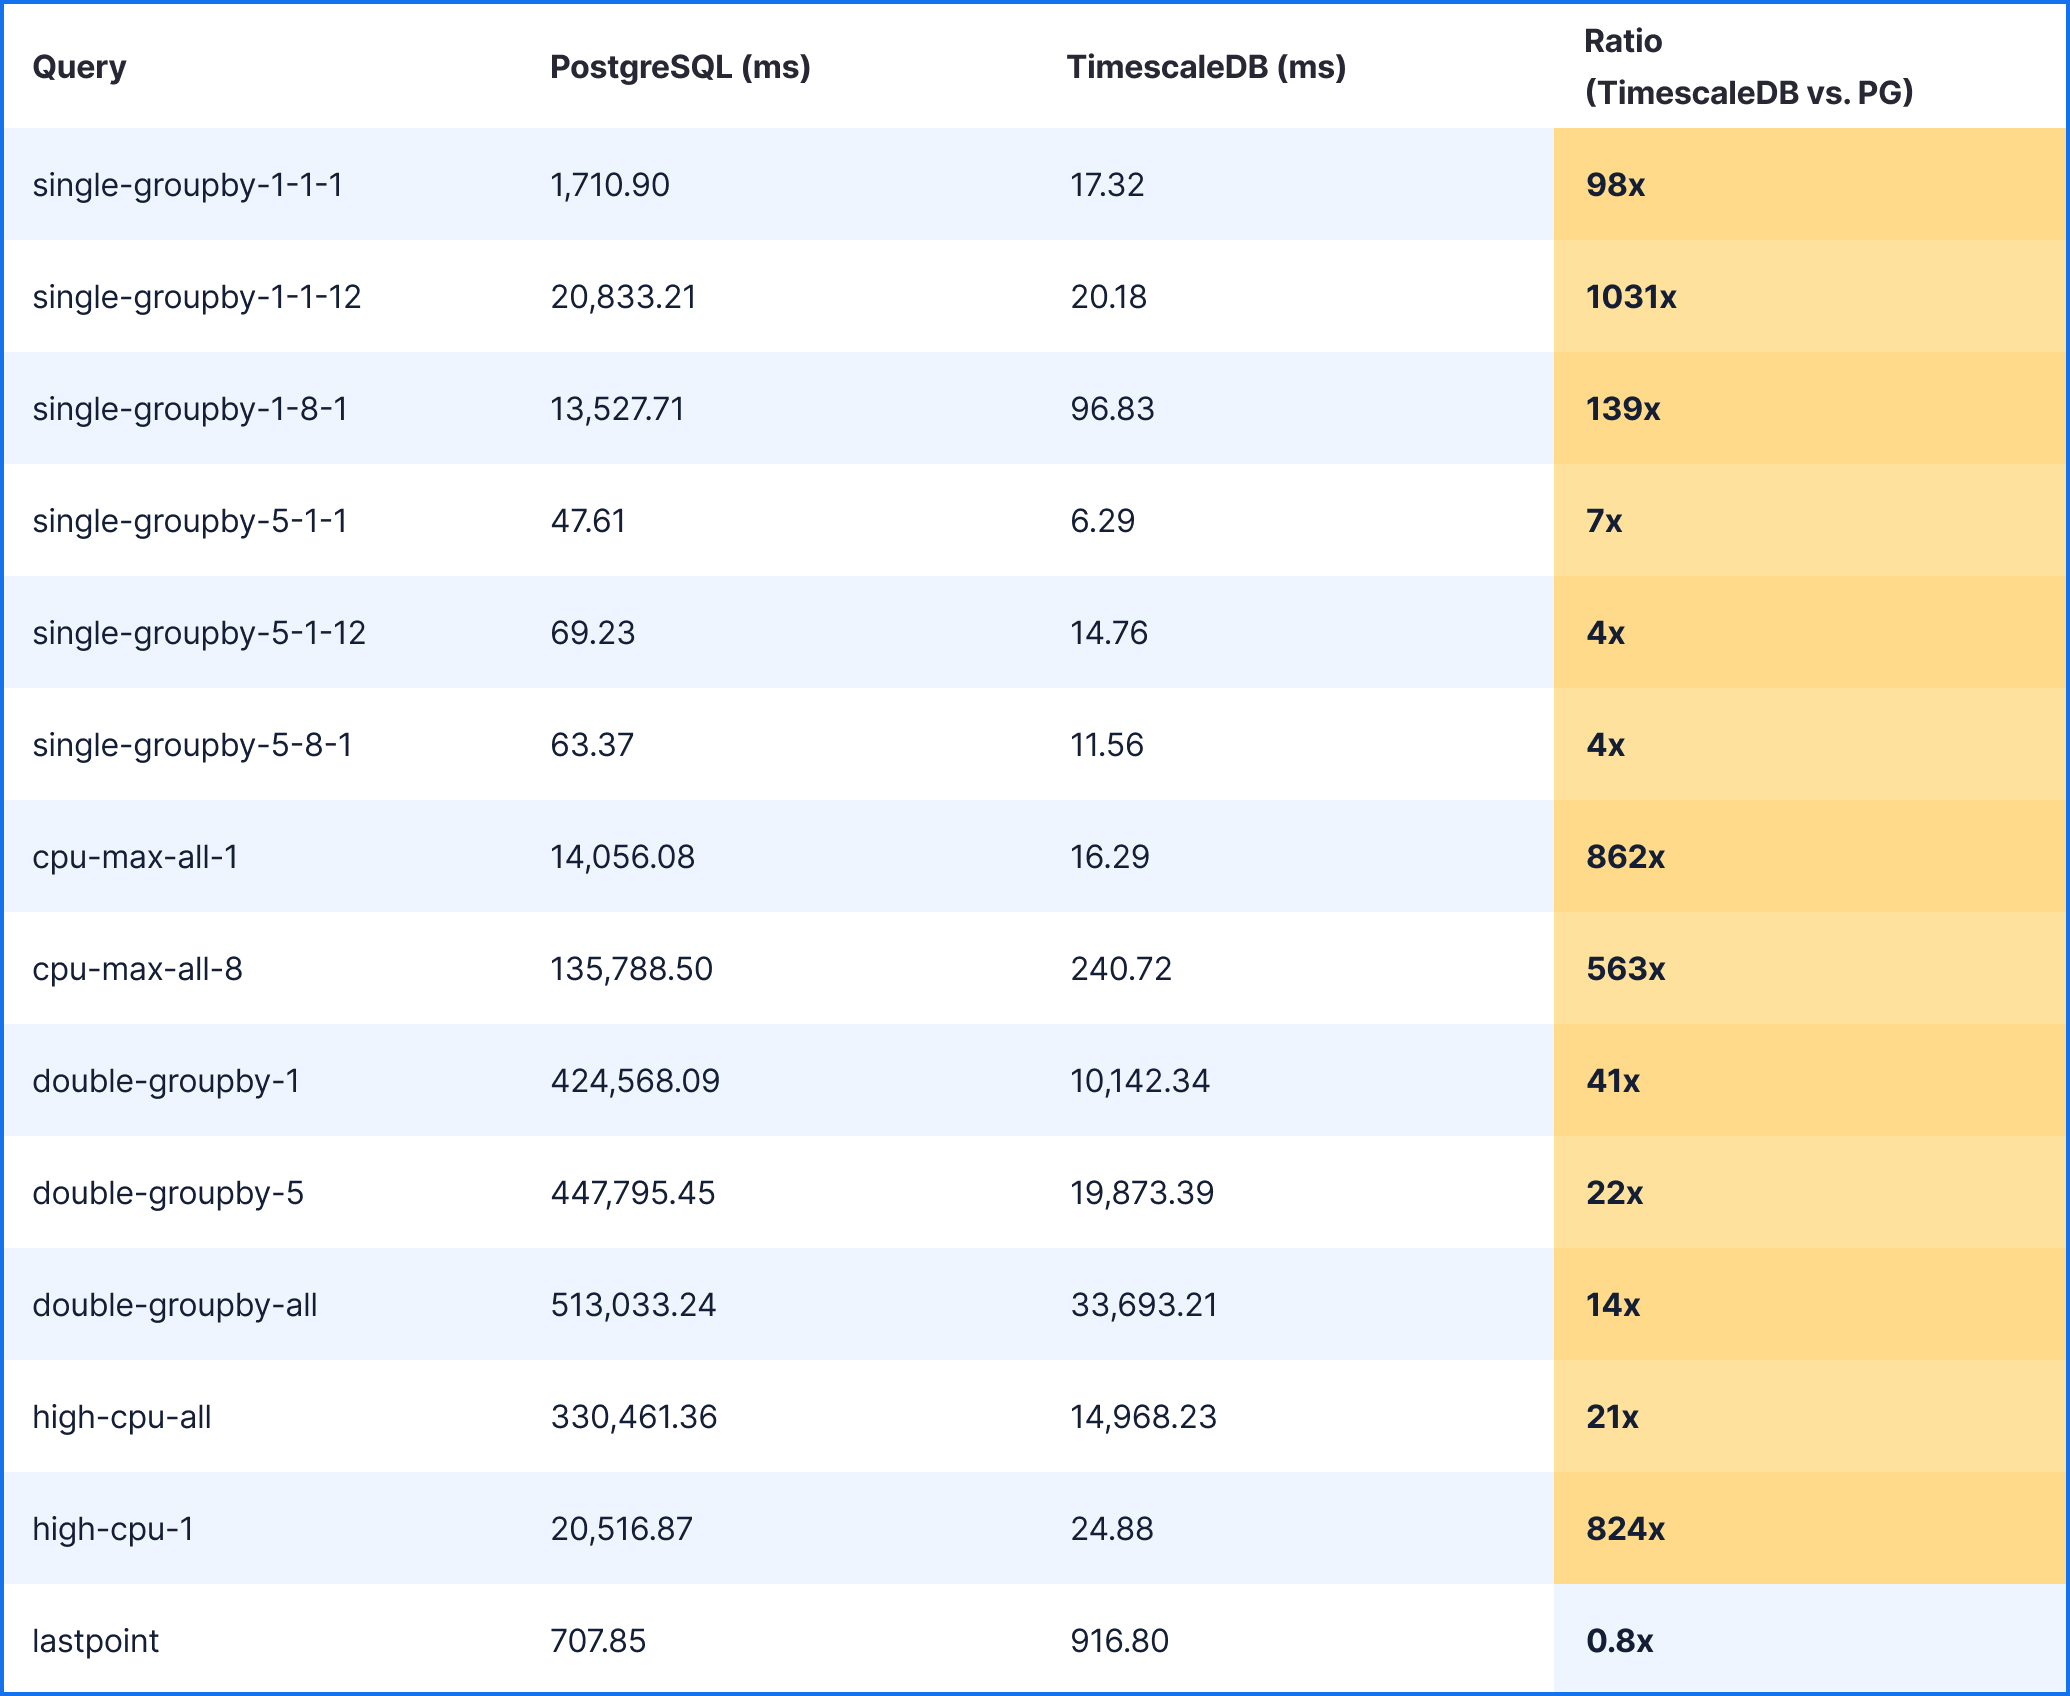 PostgreSQL query latency in milliseconds, compared to TimescaleDB. For 14
query statements, TimescaleDB performs faster in 13 cases, with improvement
ranging from 4 times to 1031 times. In the thirteenth case, TimescaleDB performs
slightly worse, at 0.8 times as fast as standard PostgreSQL.